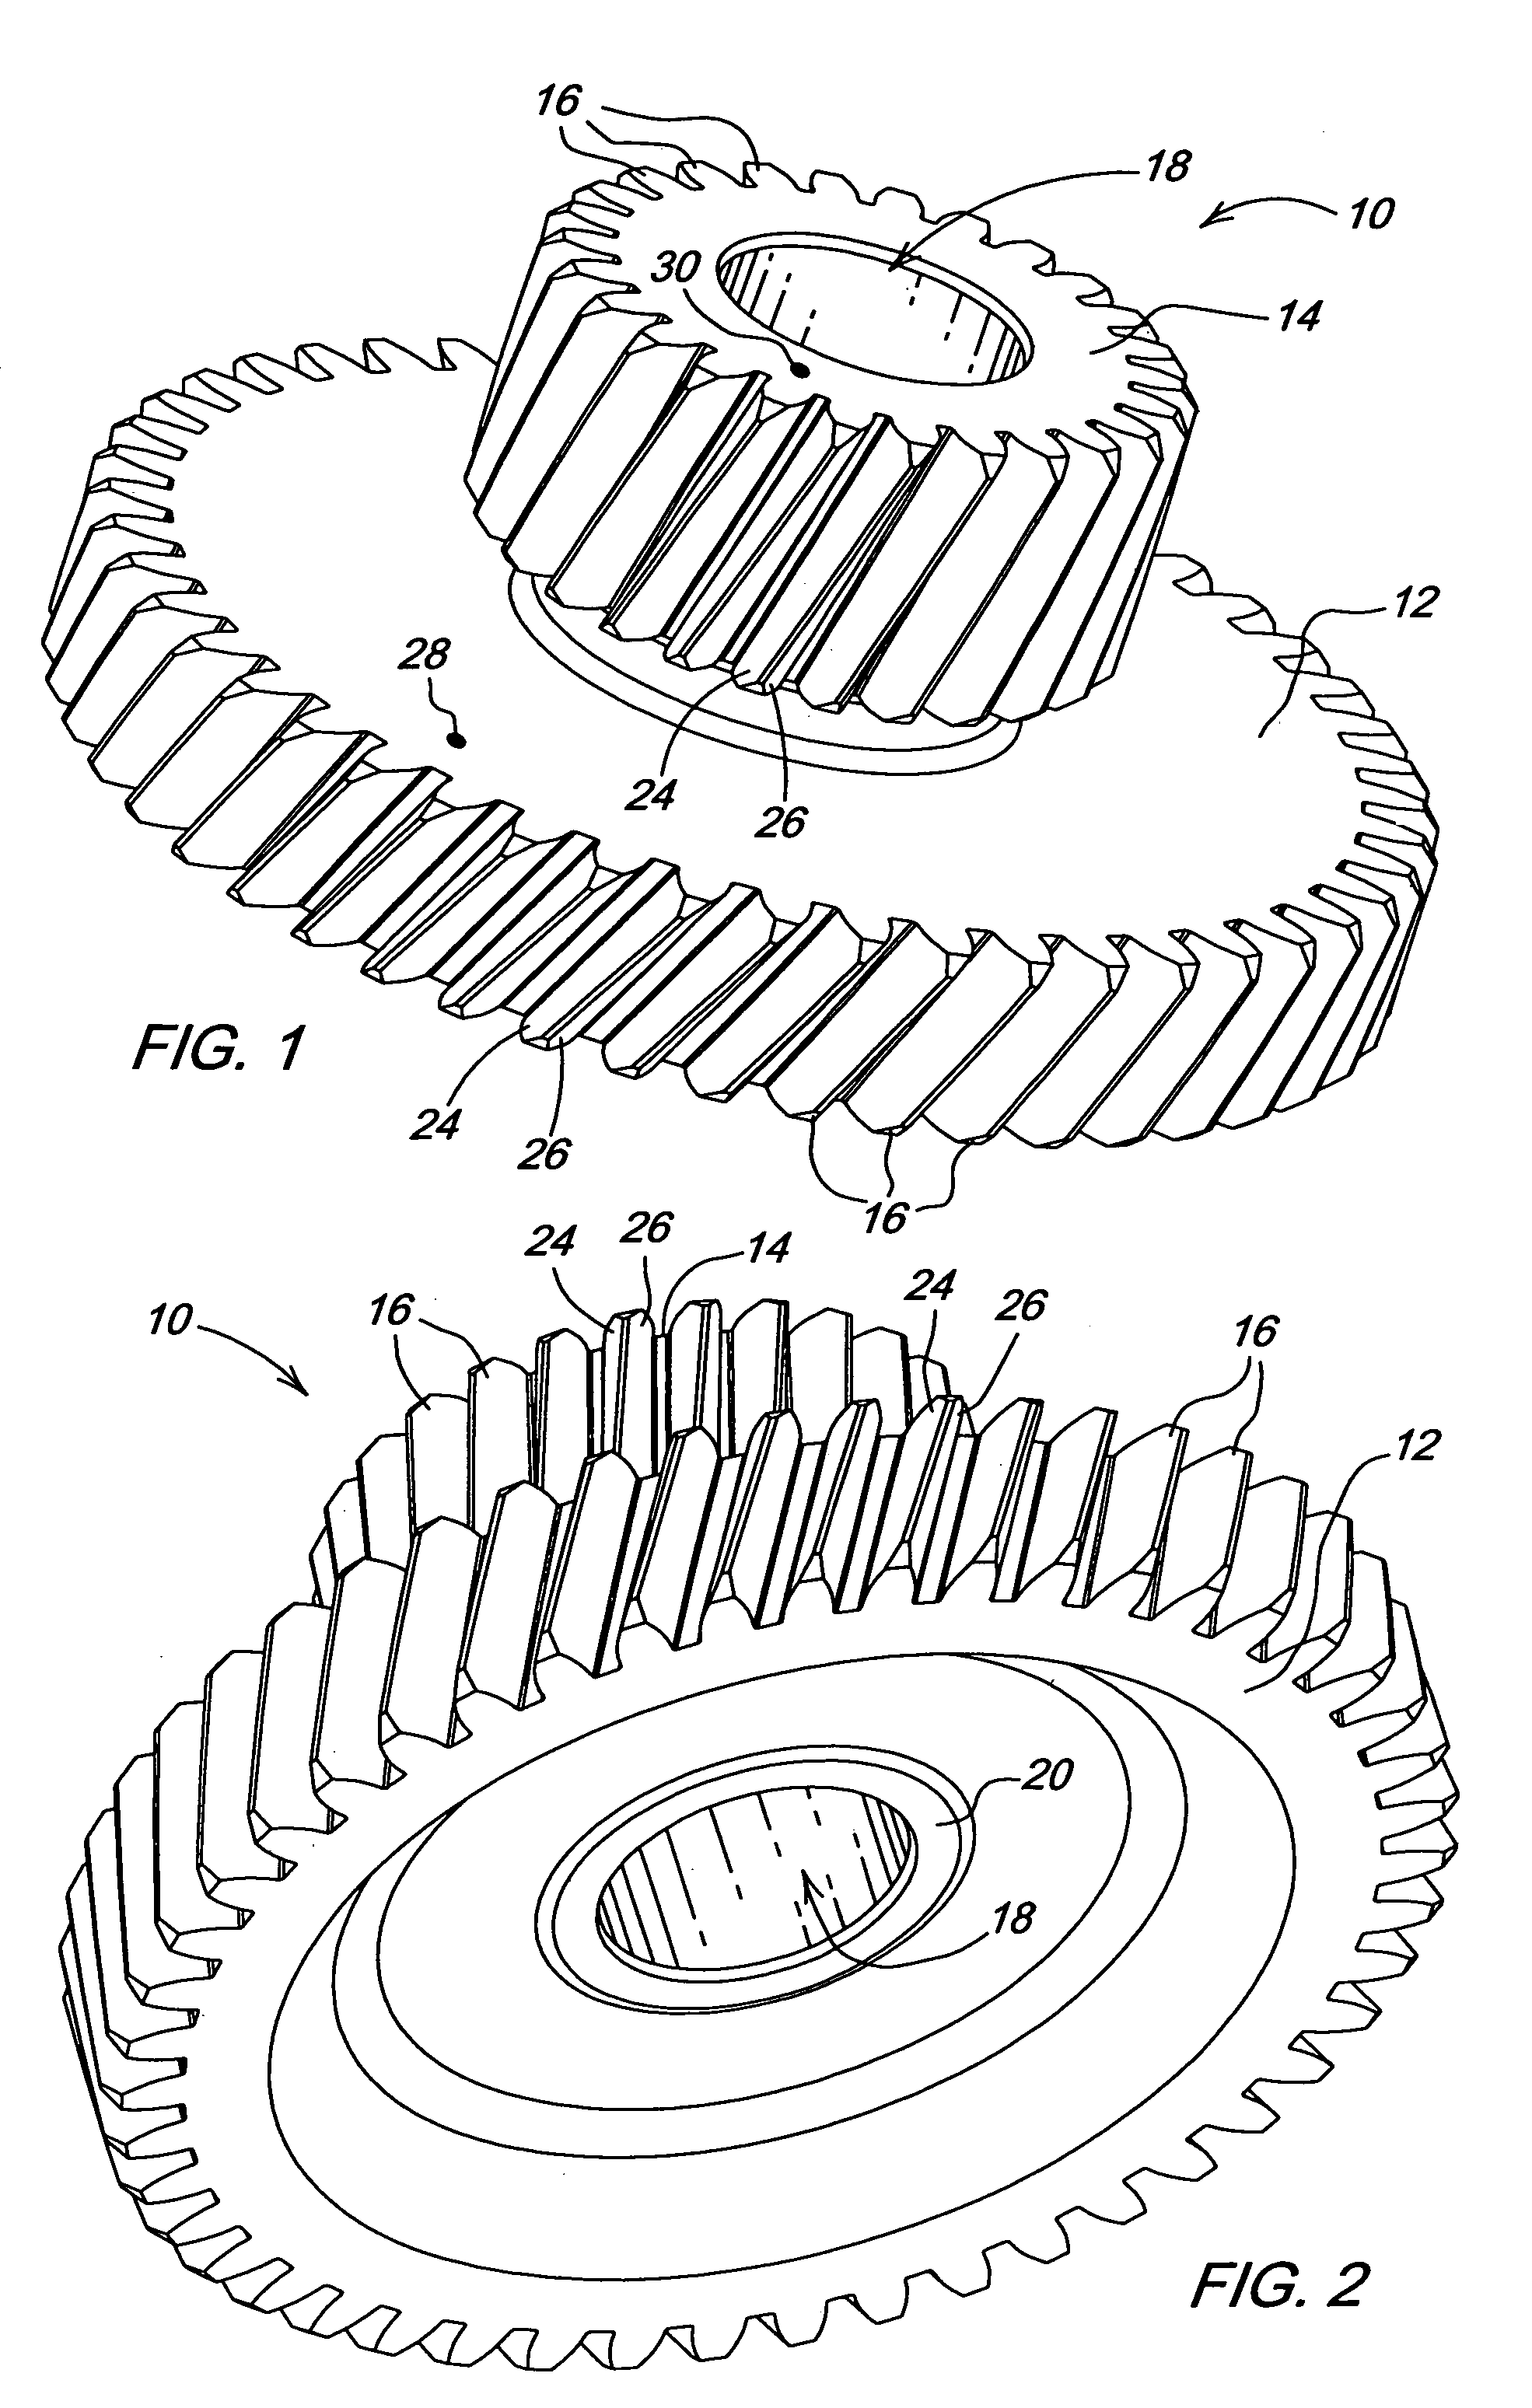 Method of manufacturing compound helical planet gears having different leads